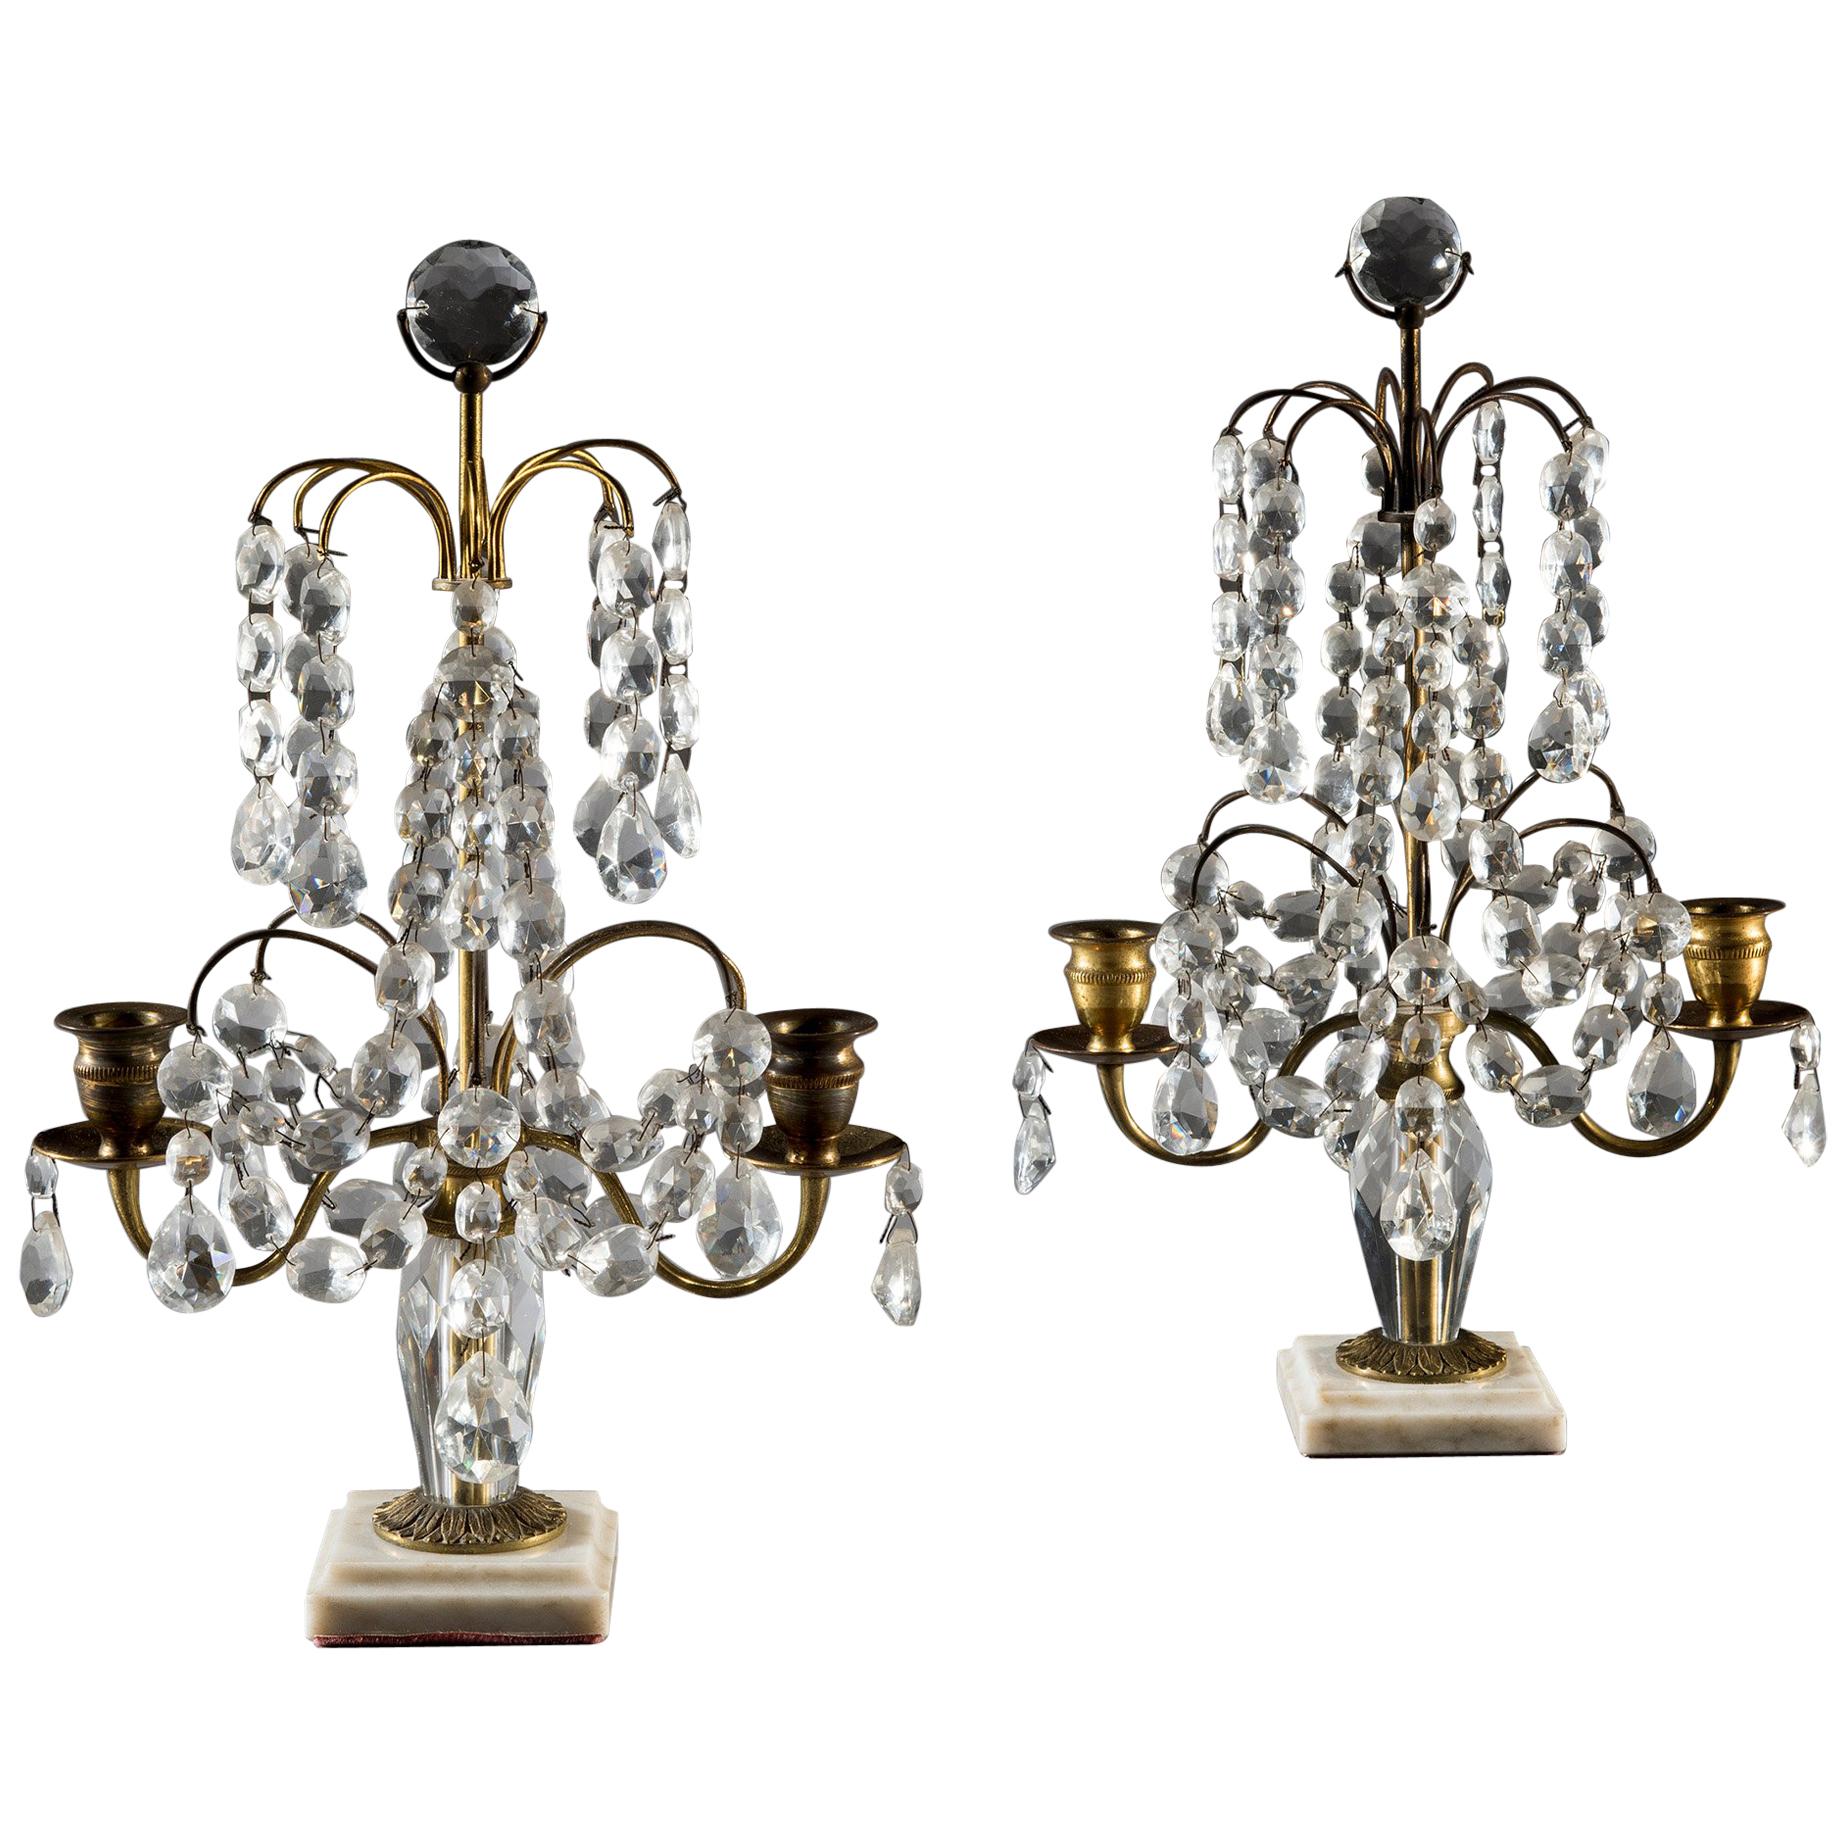 Pair of Victorian Candlestick Lustres